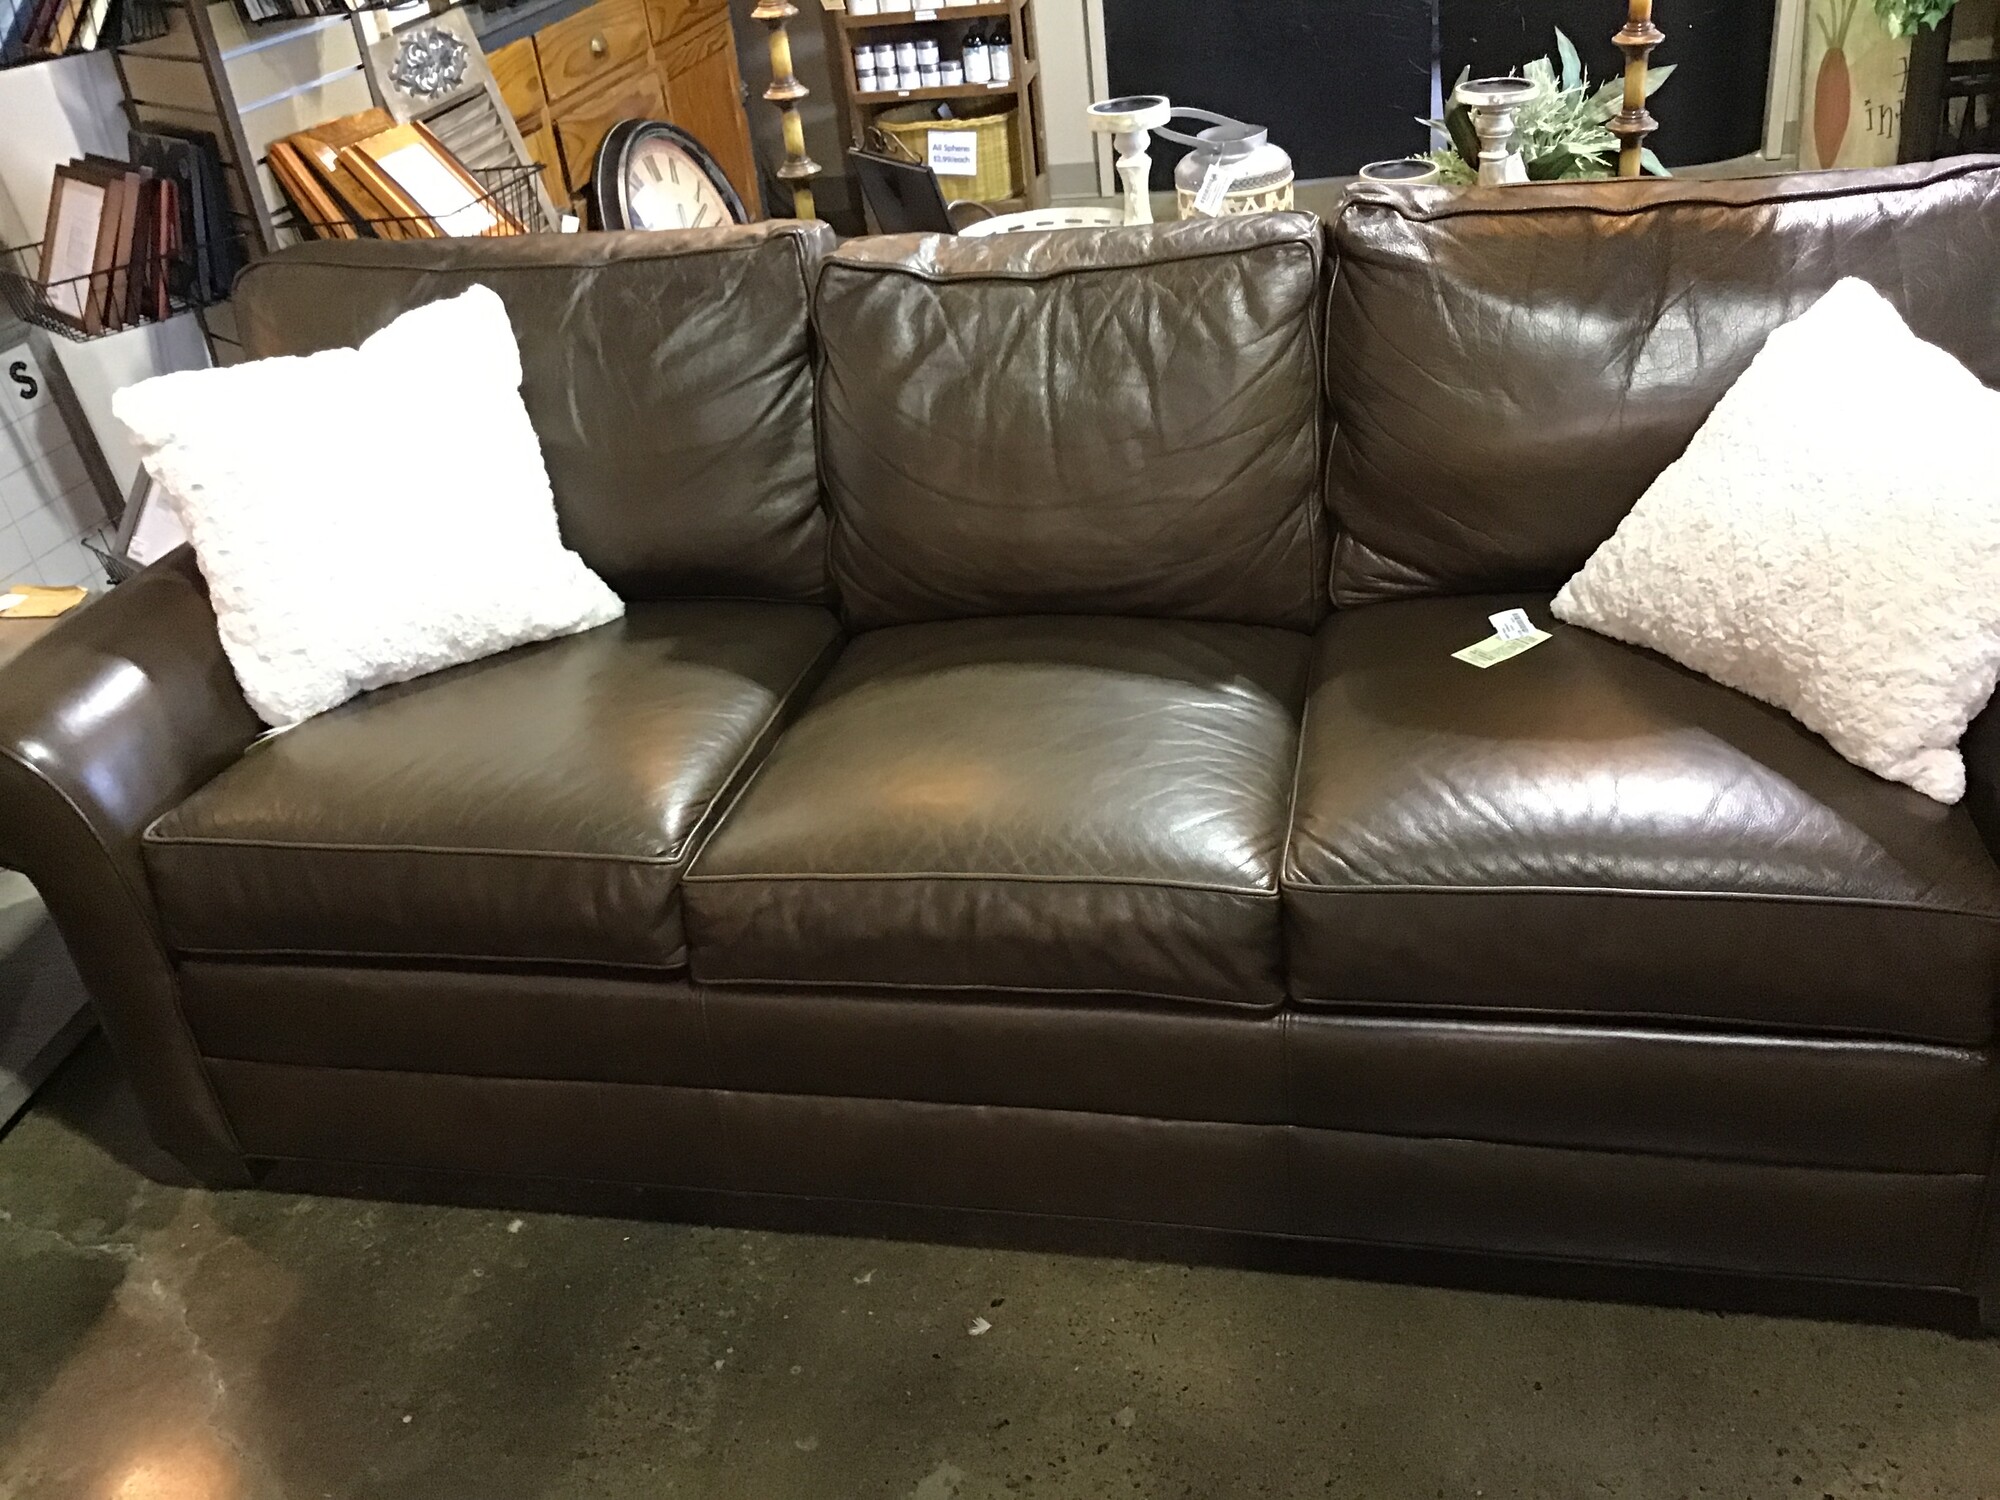 This Ethan Allen Bennett leather three-seat sofa has classic design written all over it.  Featuring luxurious leather, opulent rolled arms and welted loose cushions

Tailored by hand over a durable engineered wood frame.

Poly-wrapped high-quality foam and fiber cushions for a supportive seat.

Removable, tapered legs shown in Raisin, a rich, cool, dark brown water-based finish.

This sofa is priced $50 less than the matching sofa due to a small mark on the leather

Matches # 170099

Dimensions:  87 x 37 x 36